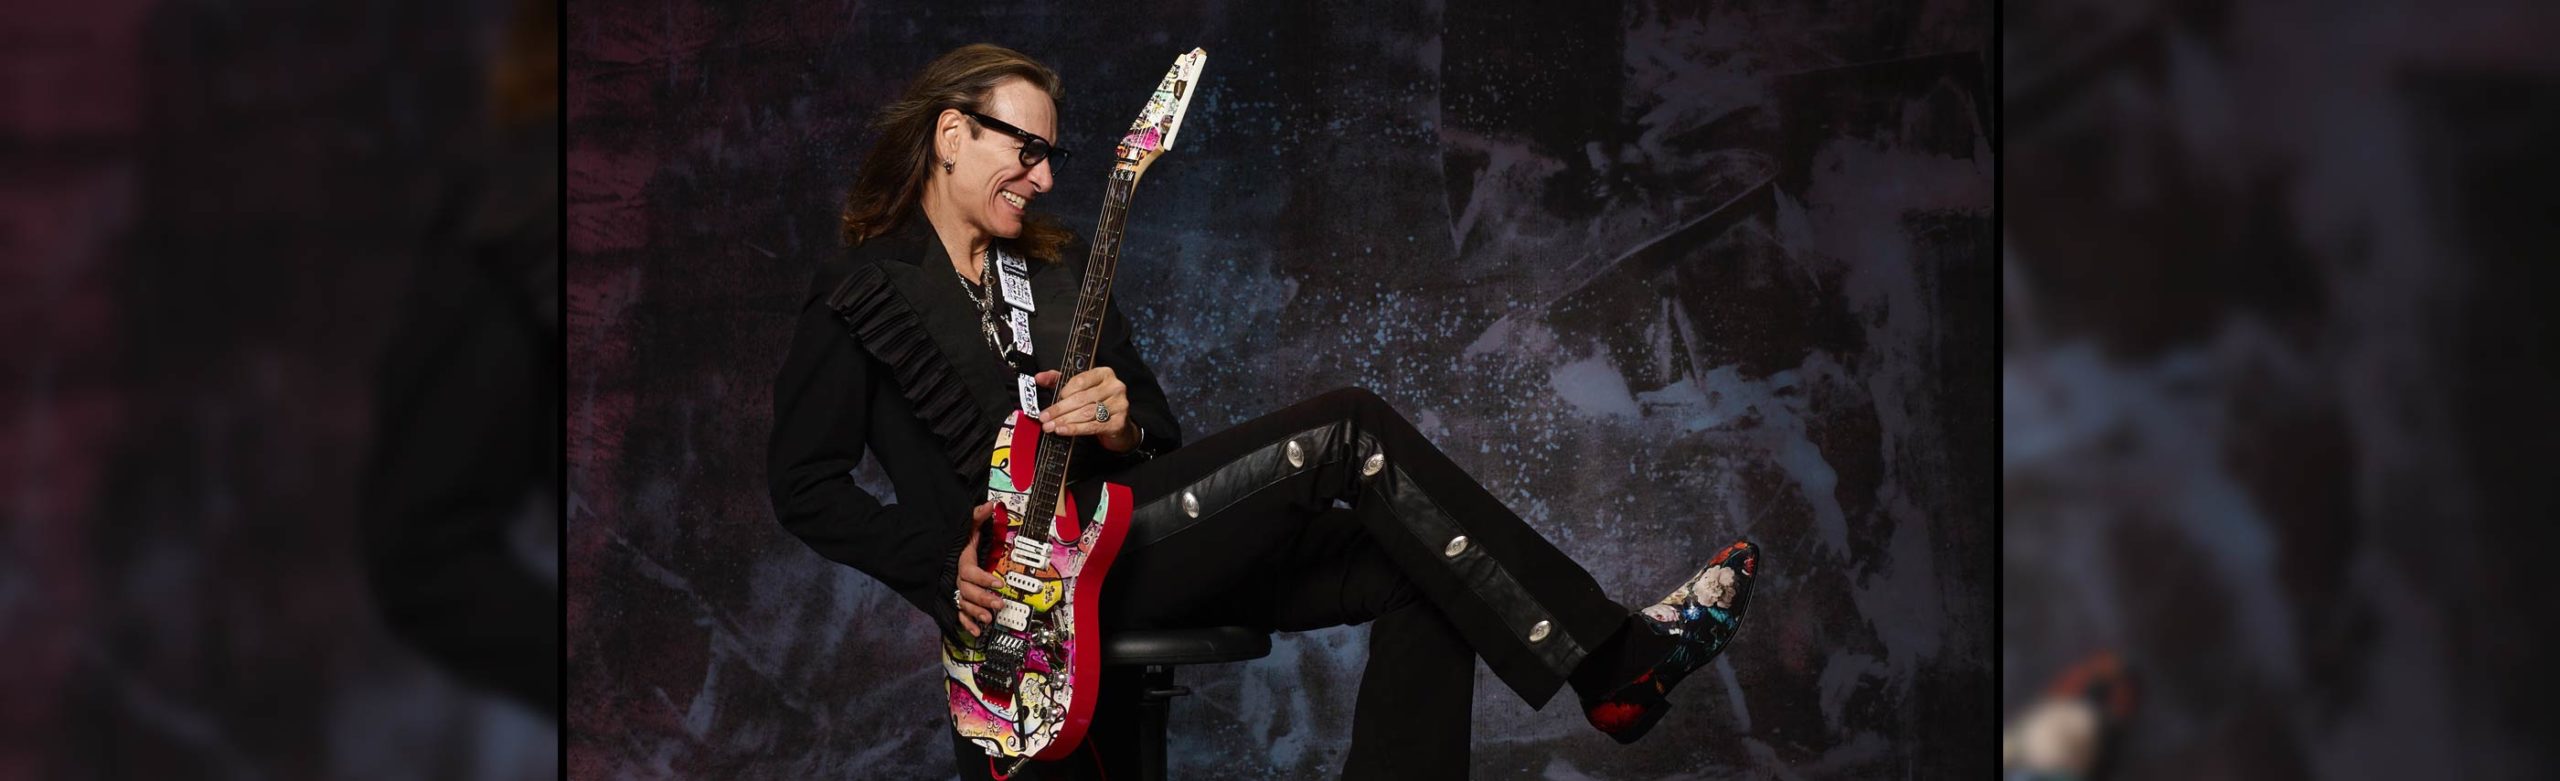 Win Tickets to Steve Vai at The Wilma 2022 Image